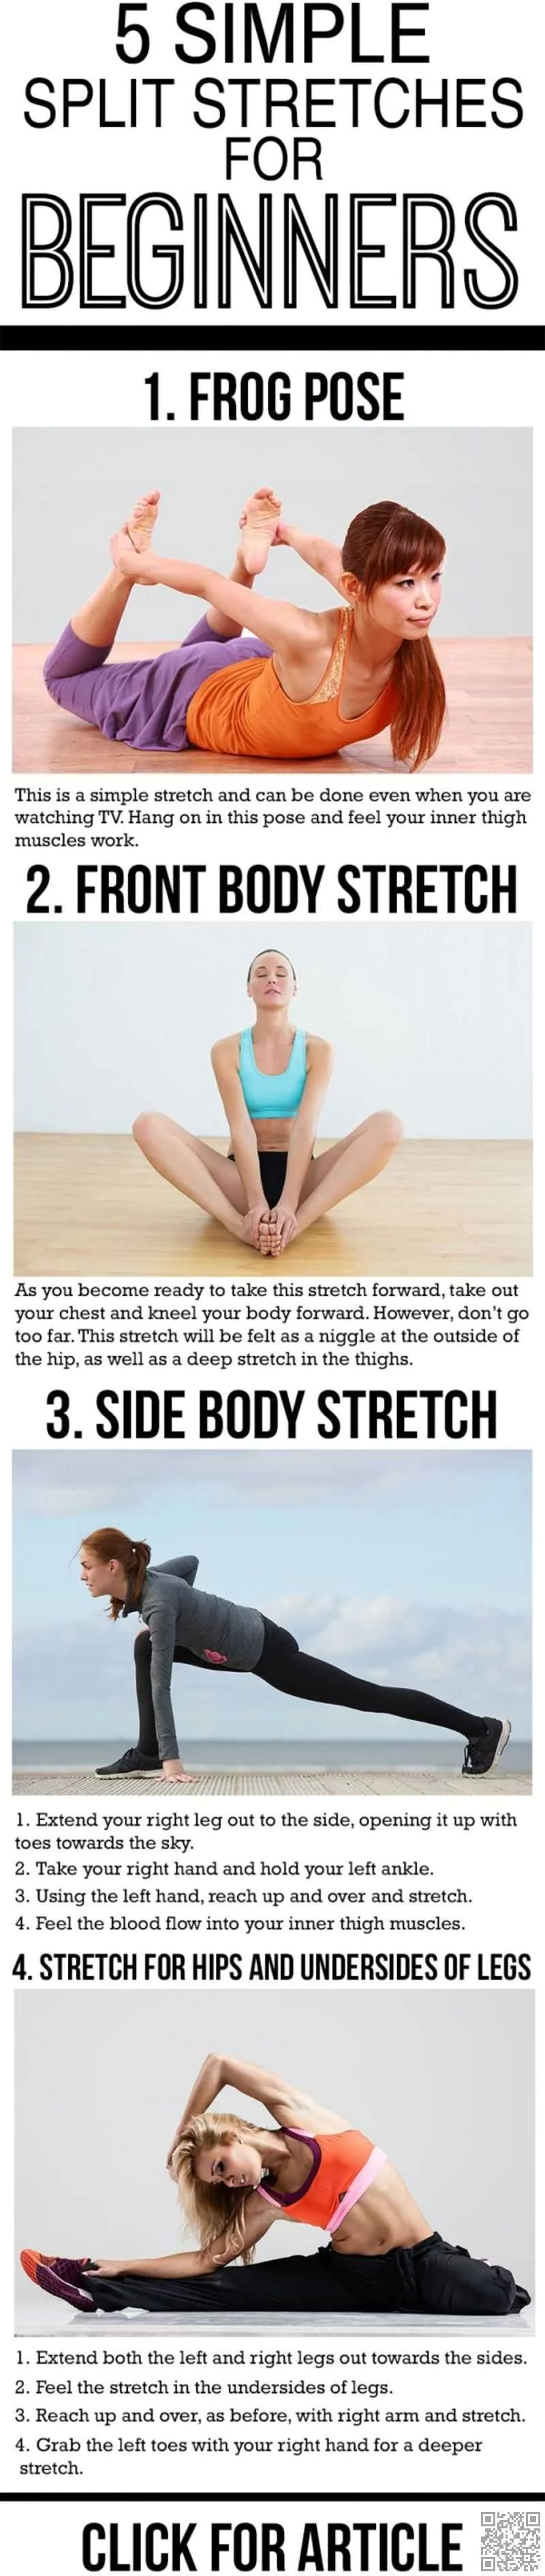 5 Simple Split Stretches For Beginners